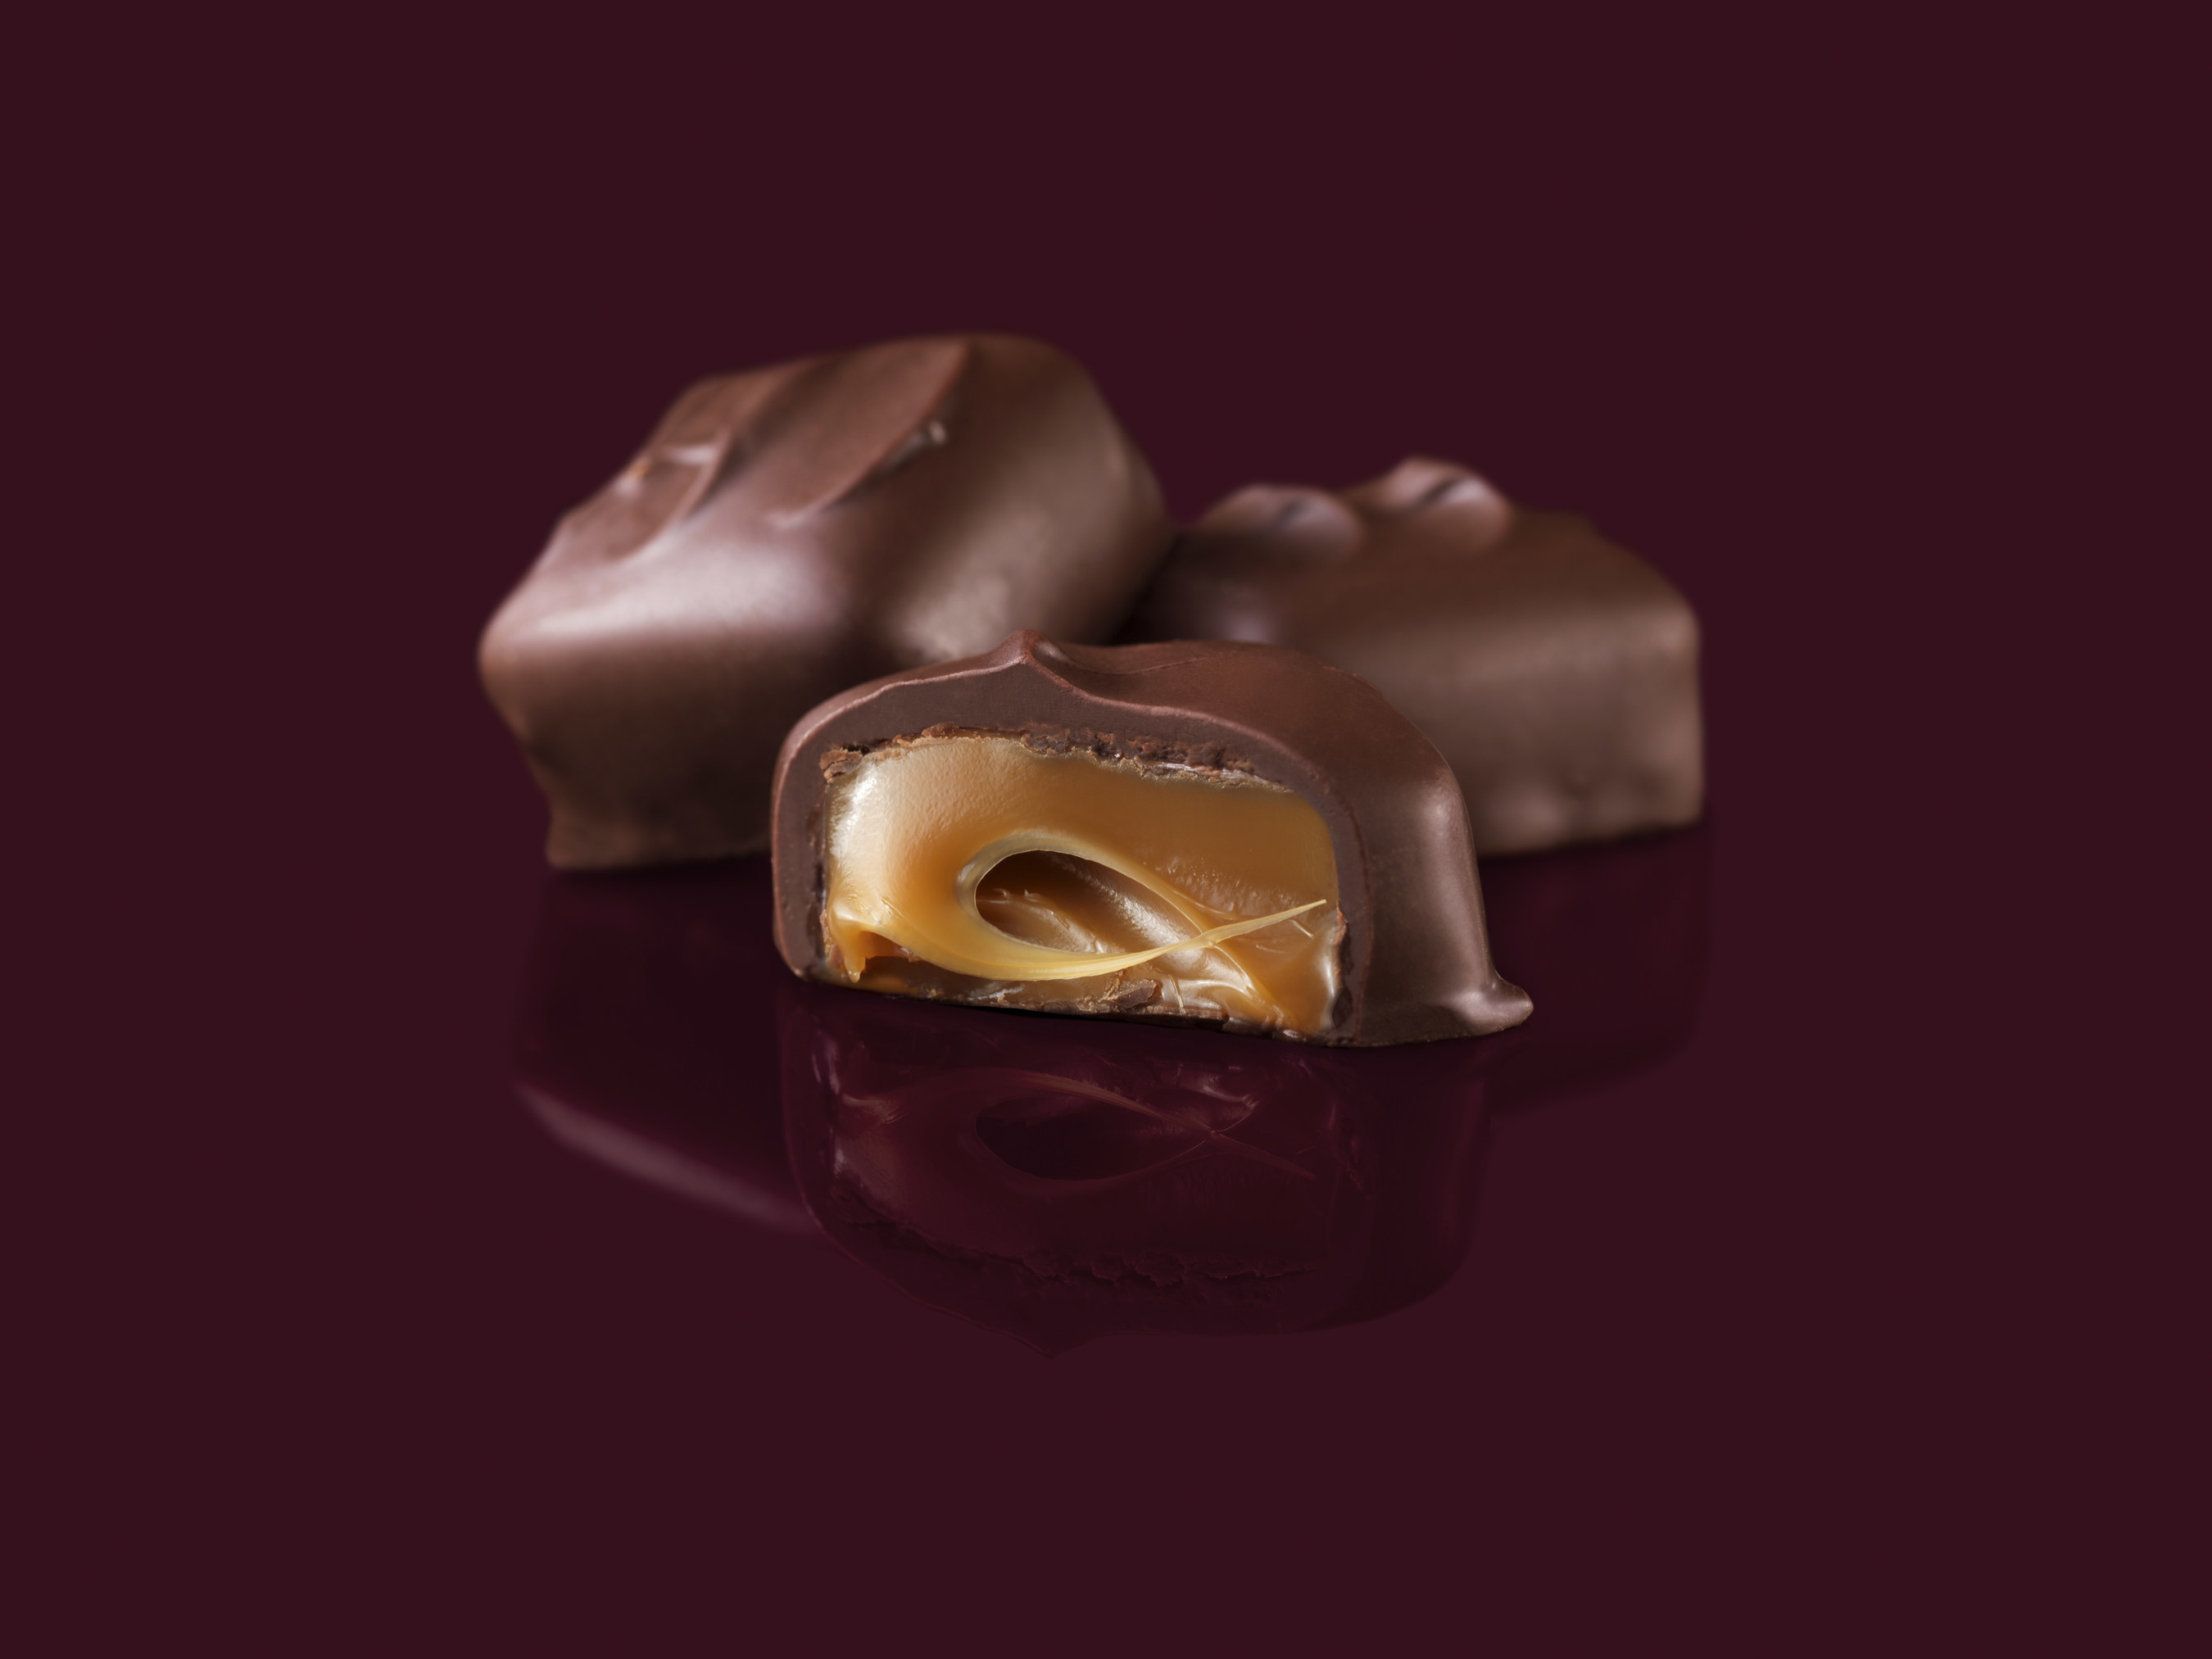 The perfect marriage of delicious HERSHEY'S chocolate with smooth, creamy caramel that makes every day feel a little fancy.